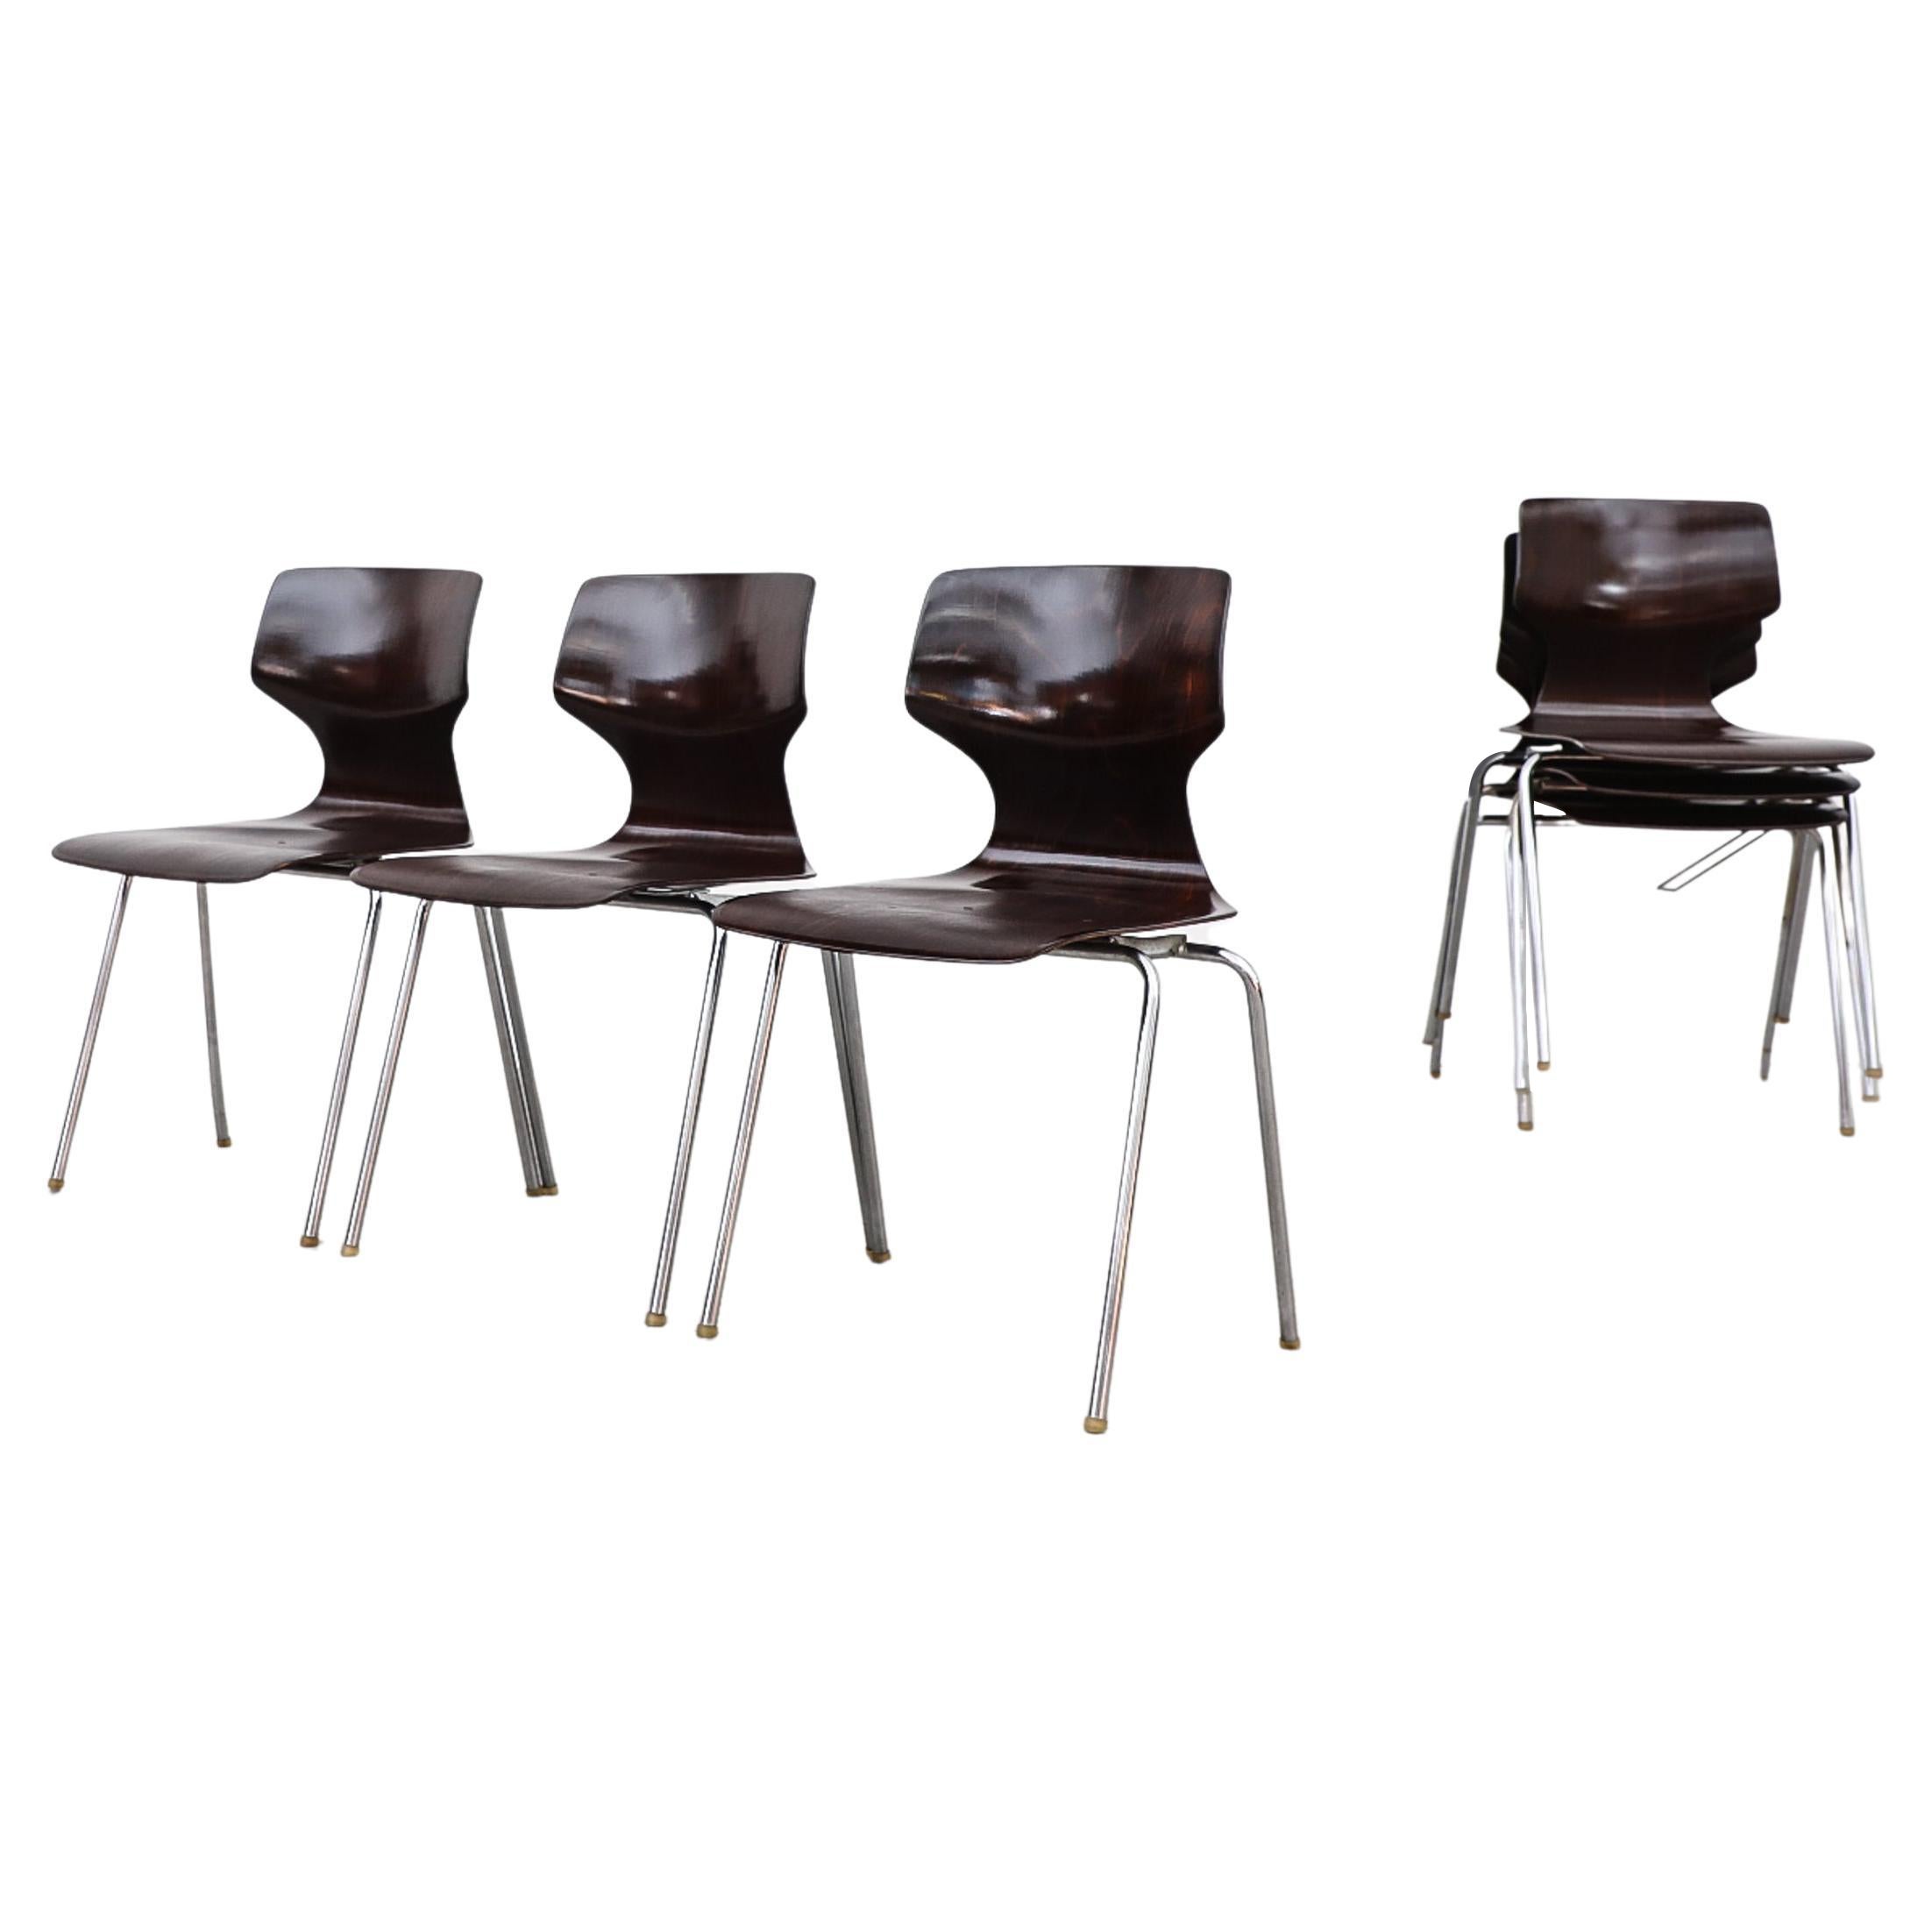 Pagholz Flötotto Dark Brown Wingback Stacking Chairs with Chrome Legs, 1970s